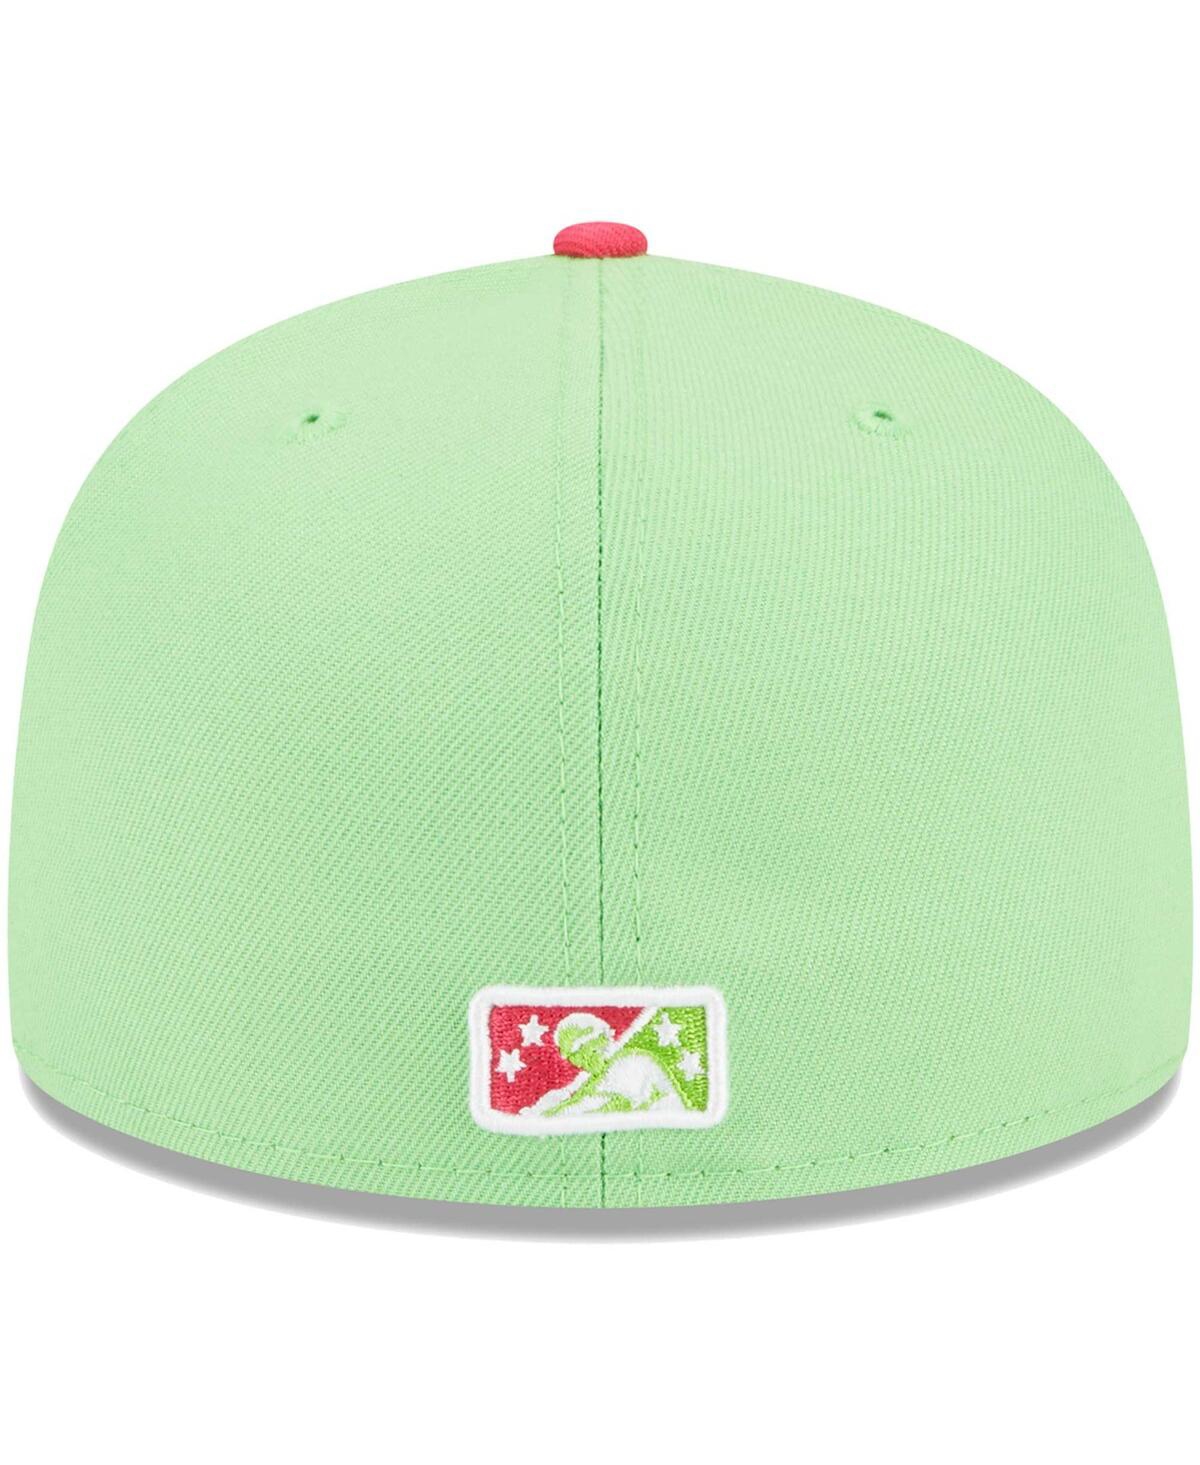 Shop New Era Men's  Green Pensacola Blue Wahoos Theme Nights Pensacola Mullets Alternate 2 59fifty Fitted